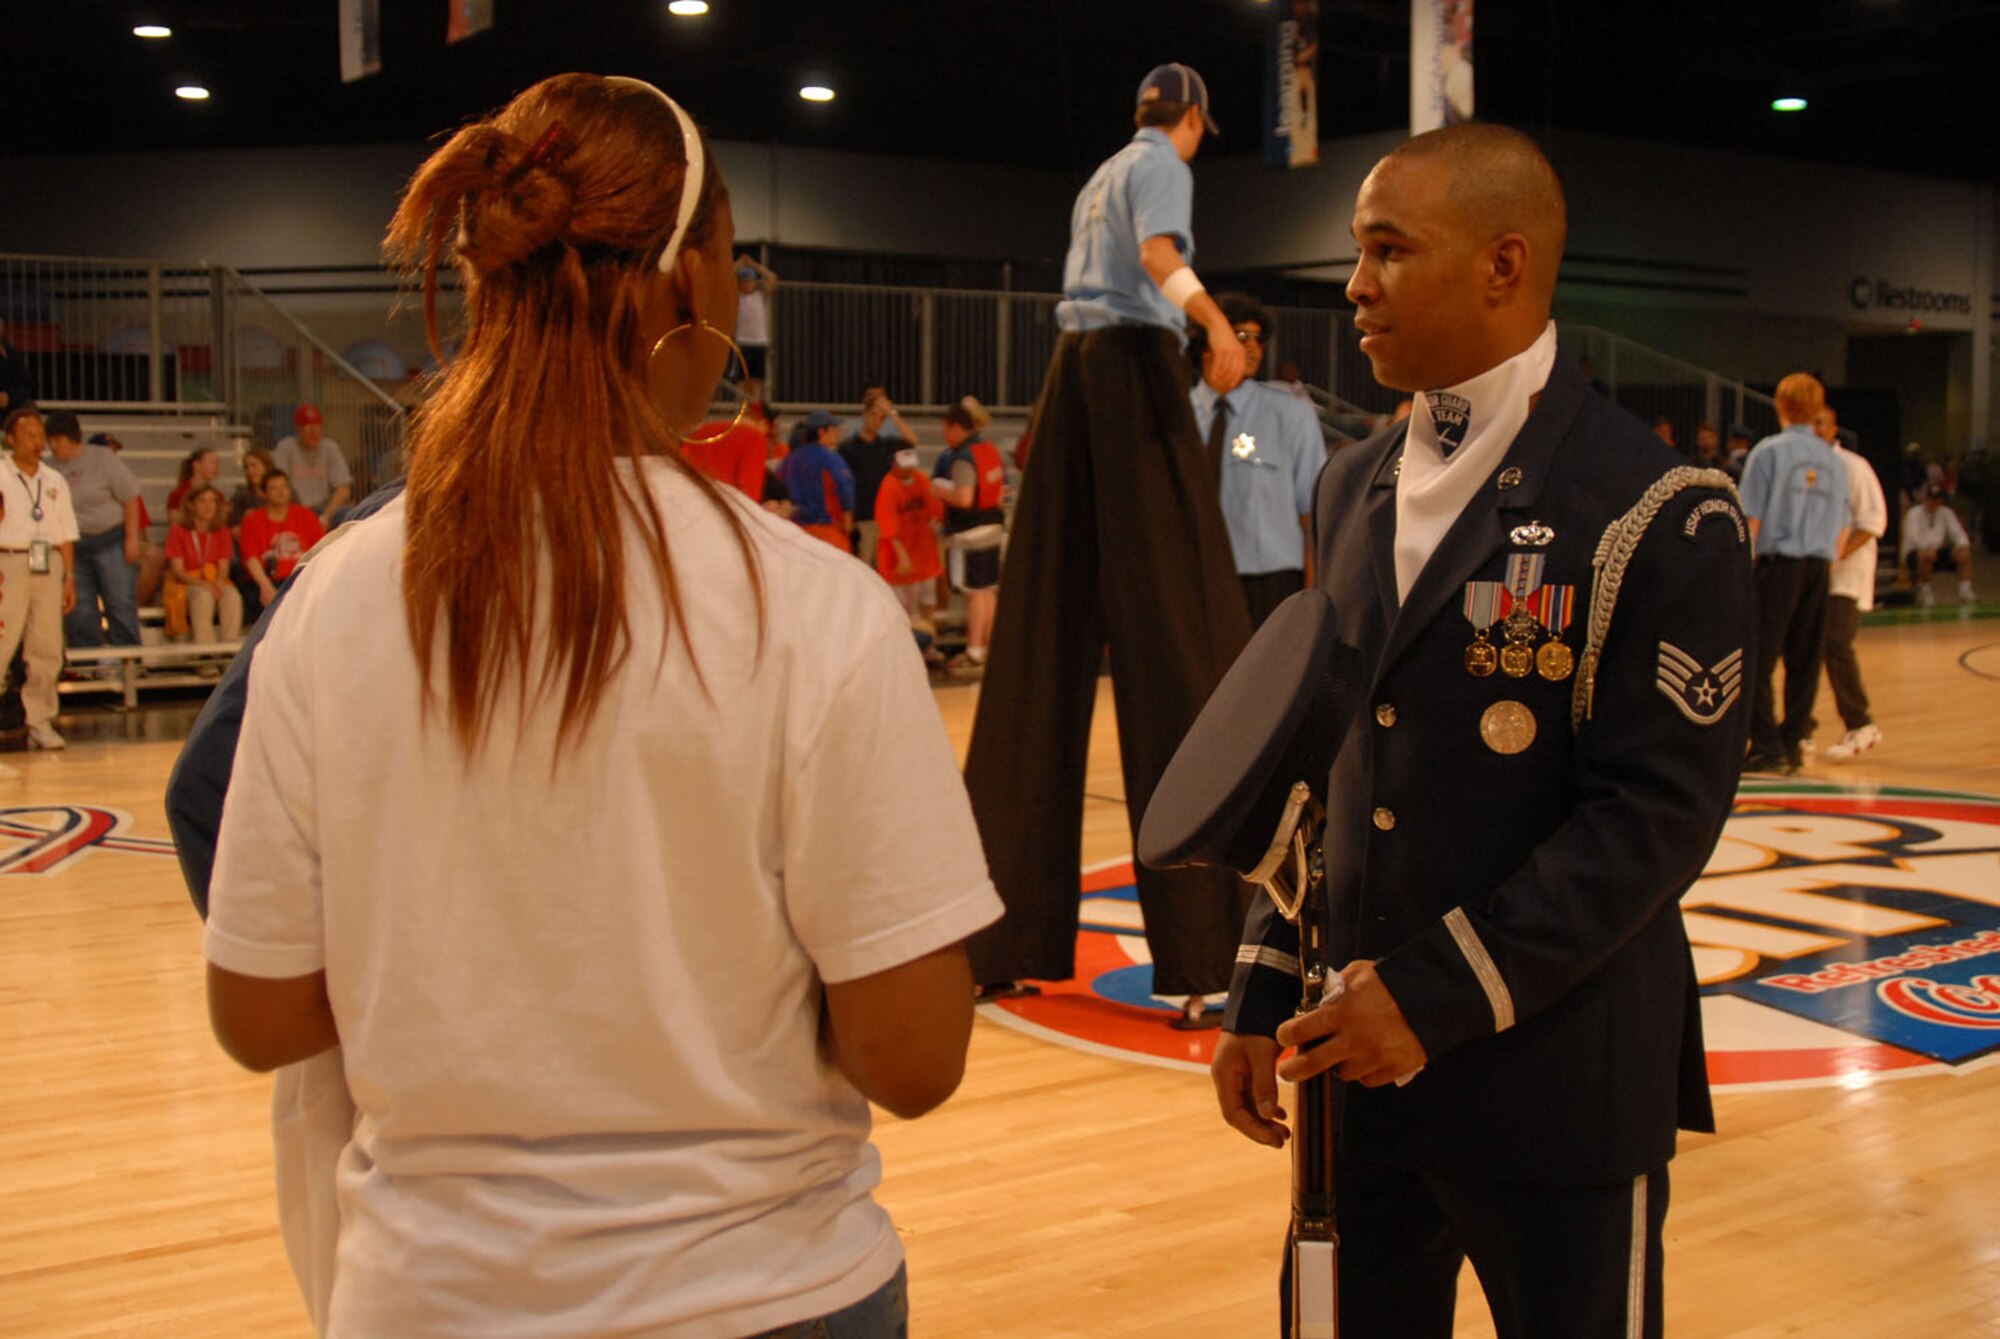 ATLANTA -- Staff Sgt. Levi Duncan, Air Force Honor Guard Drill Team operations NCOIC, talks with fans after the team's performance at the NCAA Final Four Hoop City events April 1.  The Drill Team was in Atlanta throughout the weekend performing at various events associated with the NCAA Final Four Tournament, including the opening ceremonies at Centennial Olympic Park March 30.